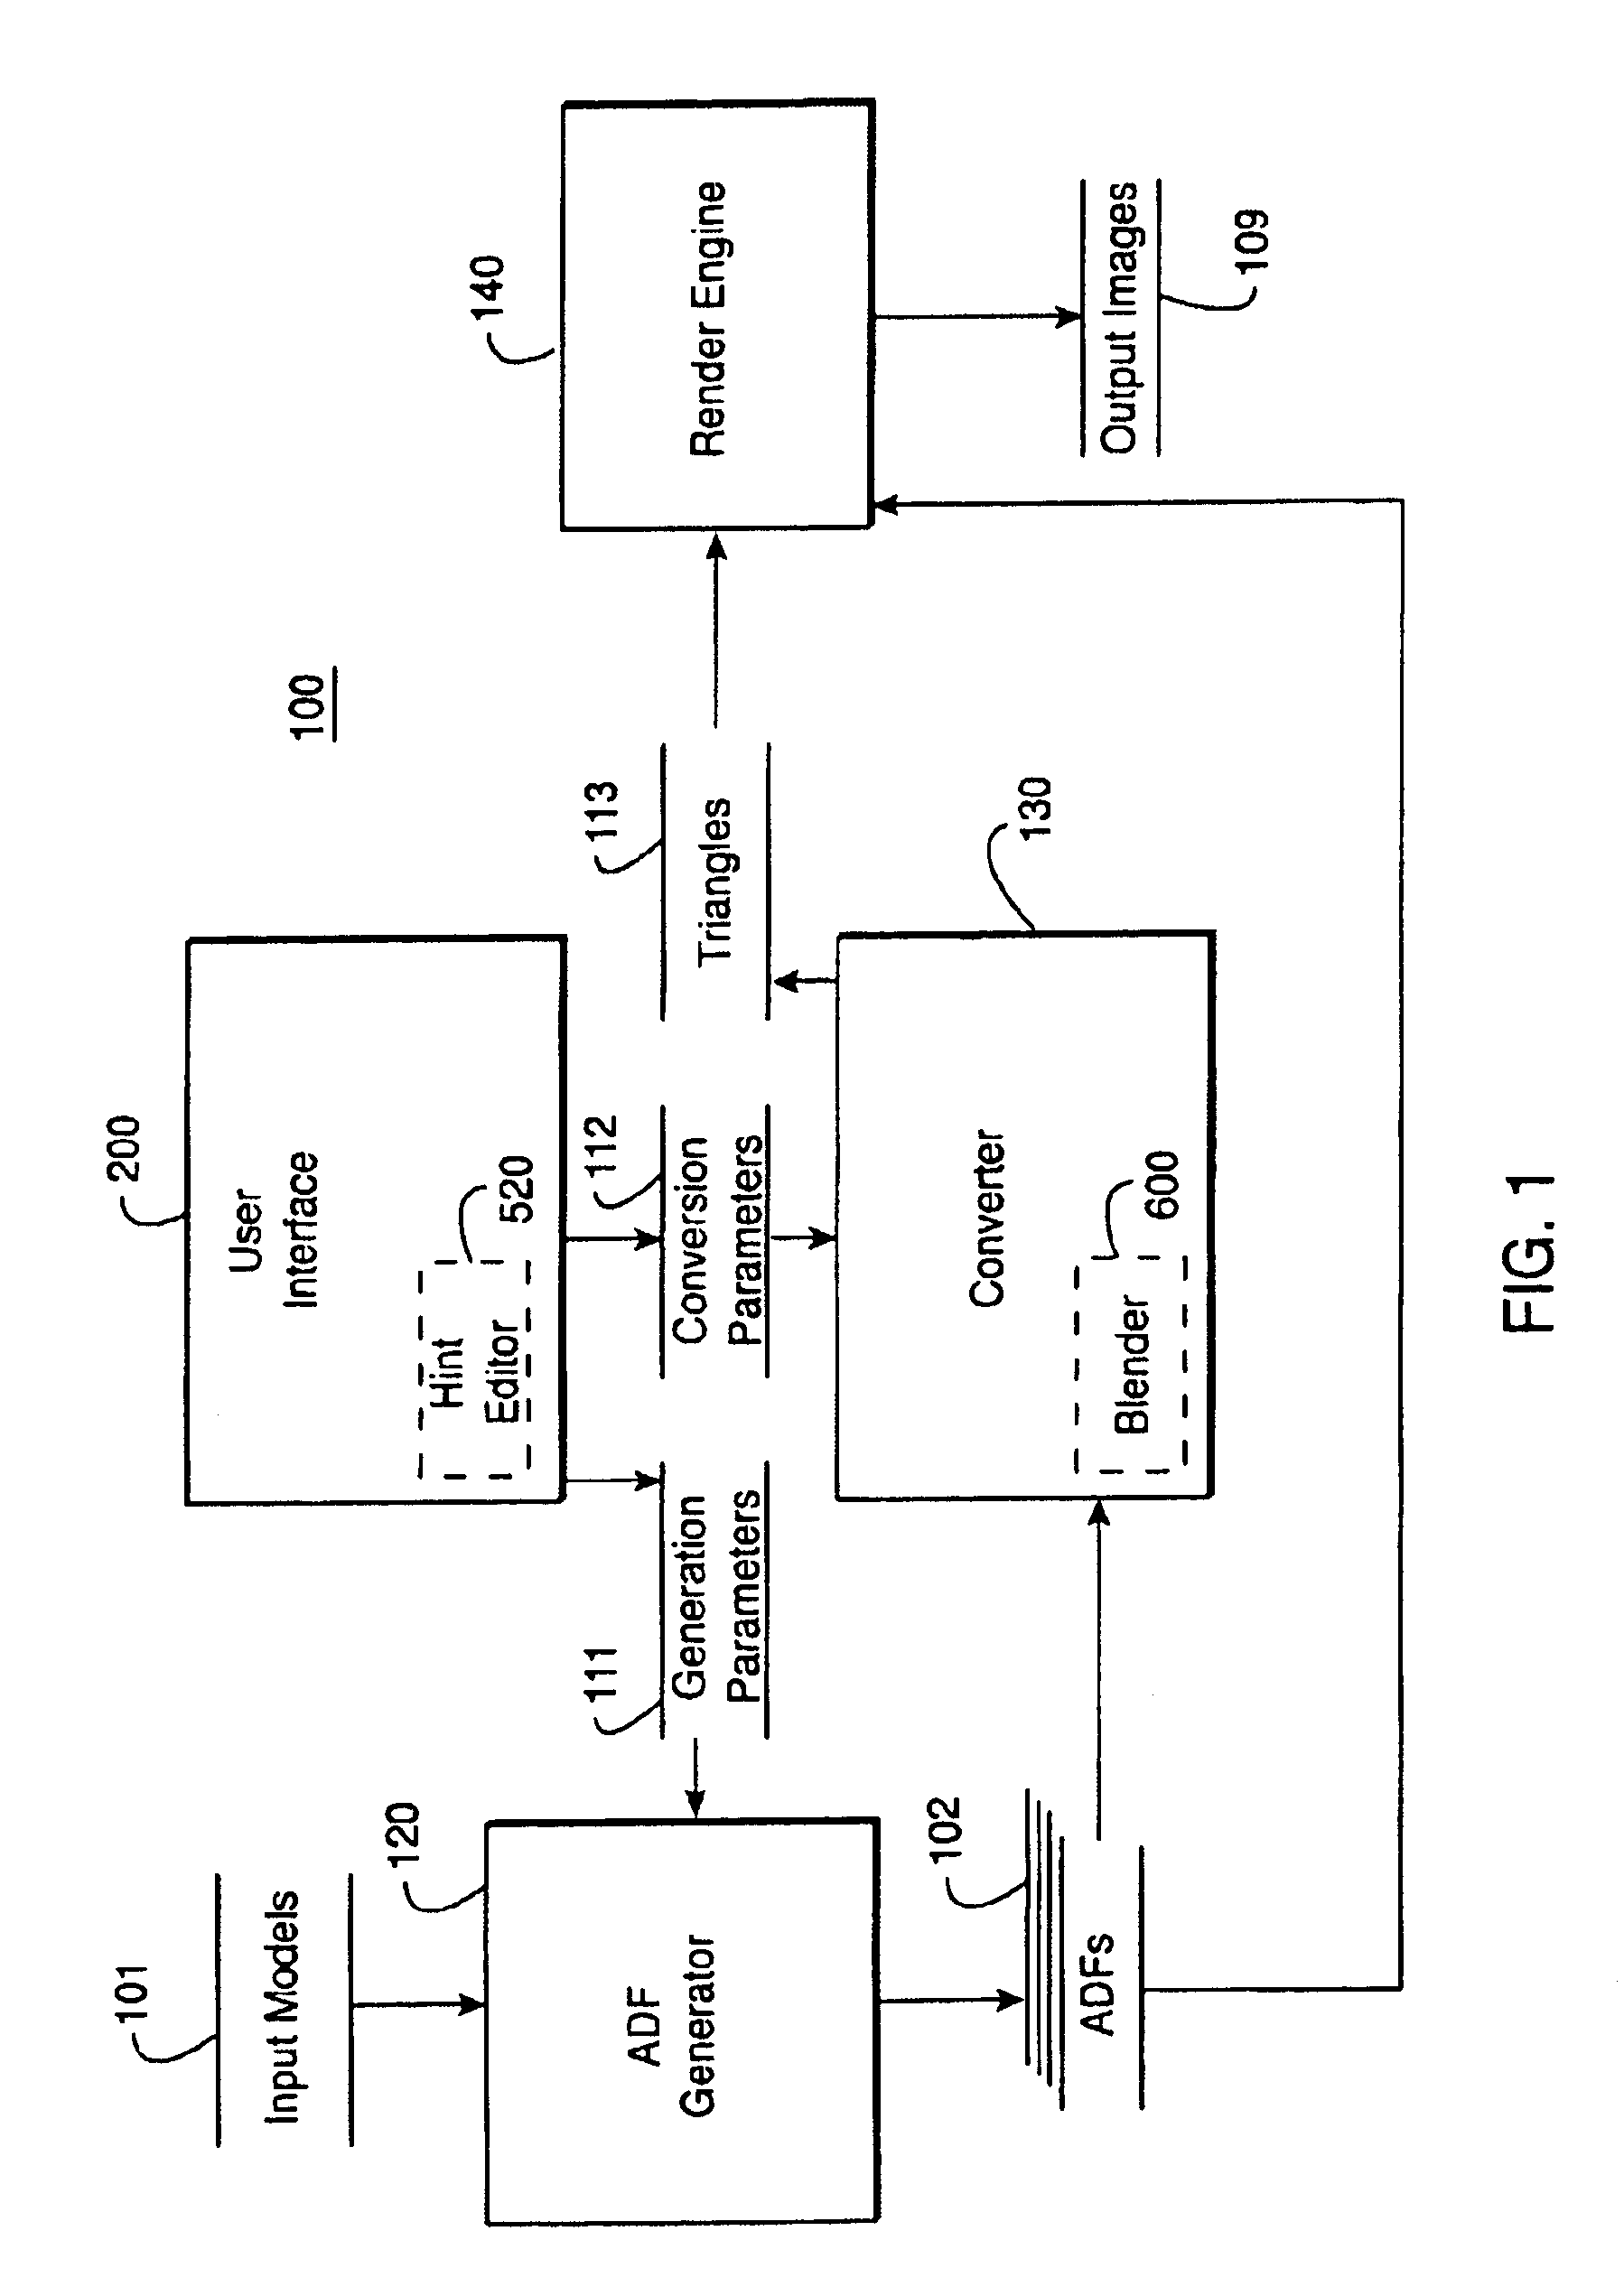 System and method for modeling graphics objects